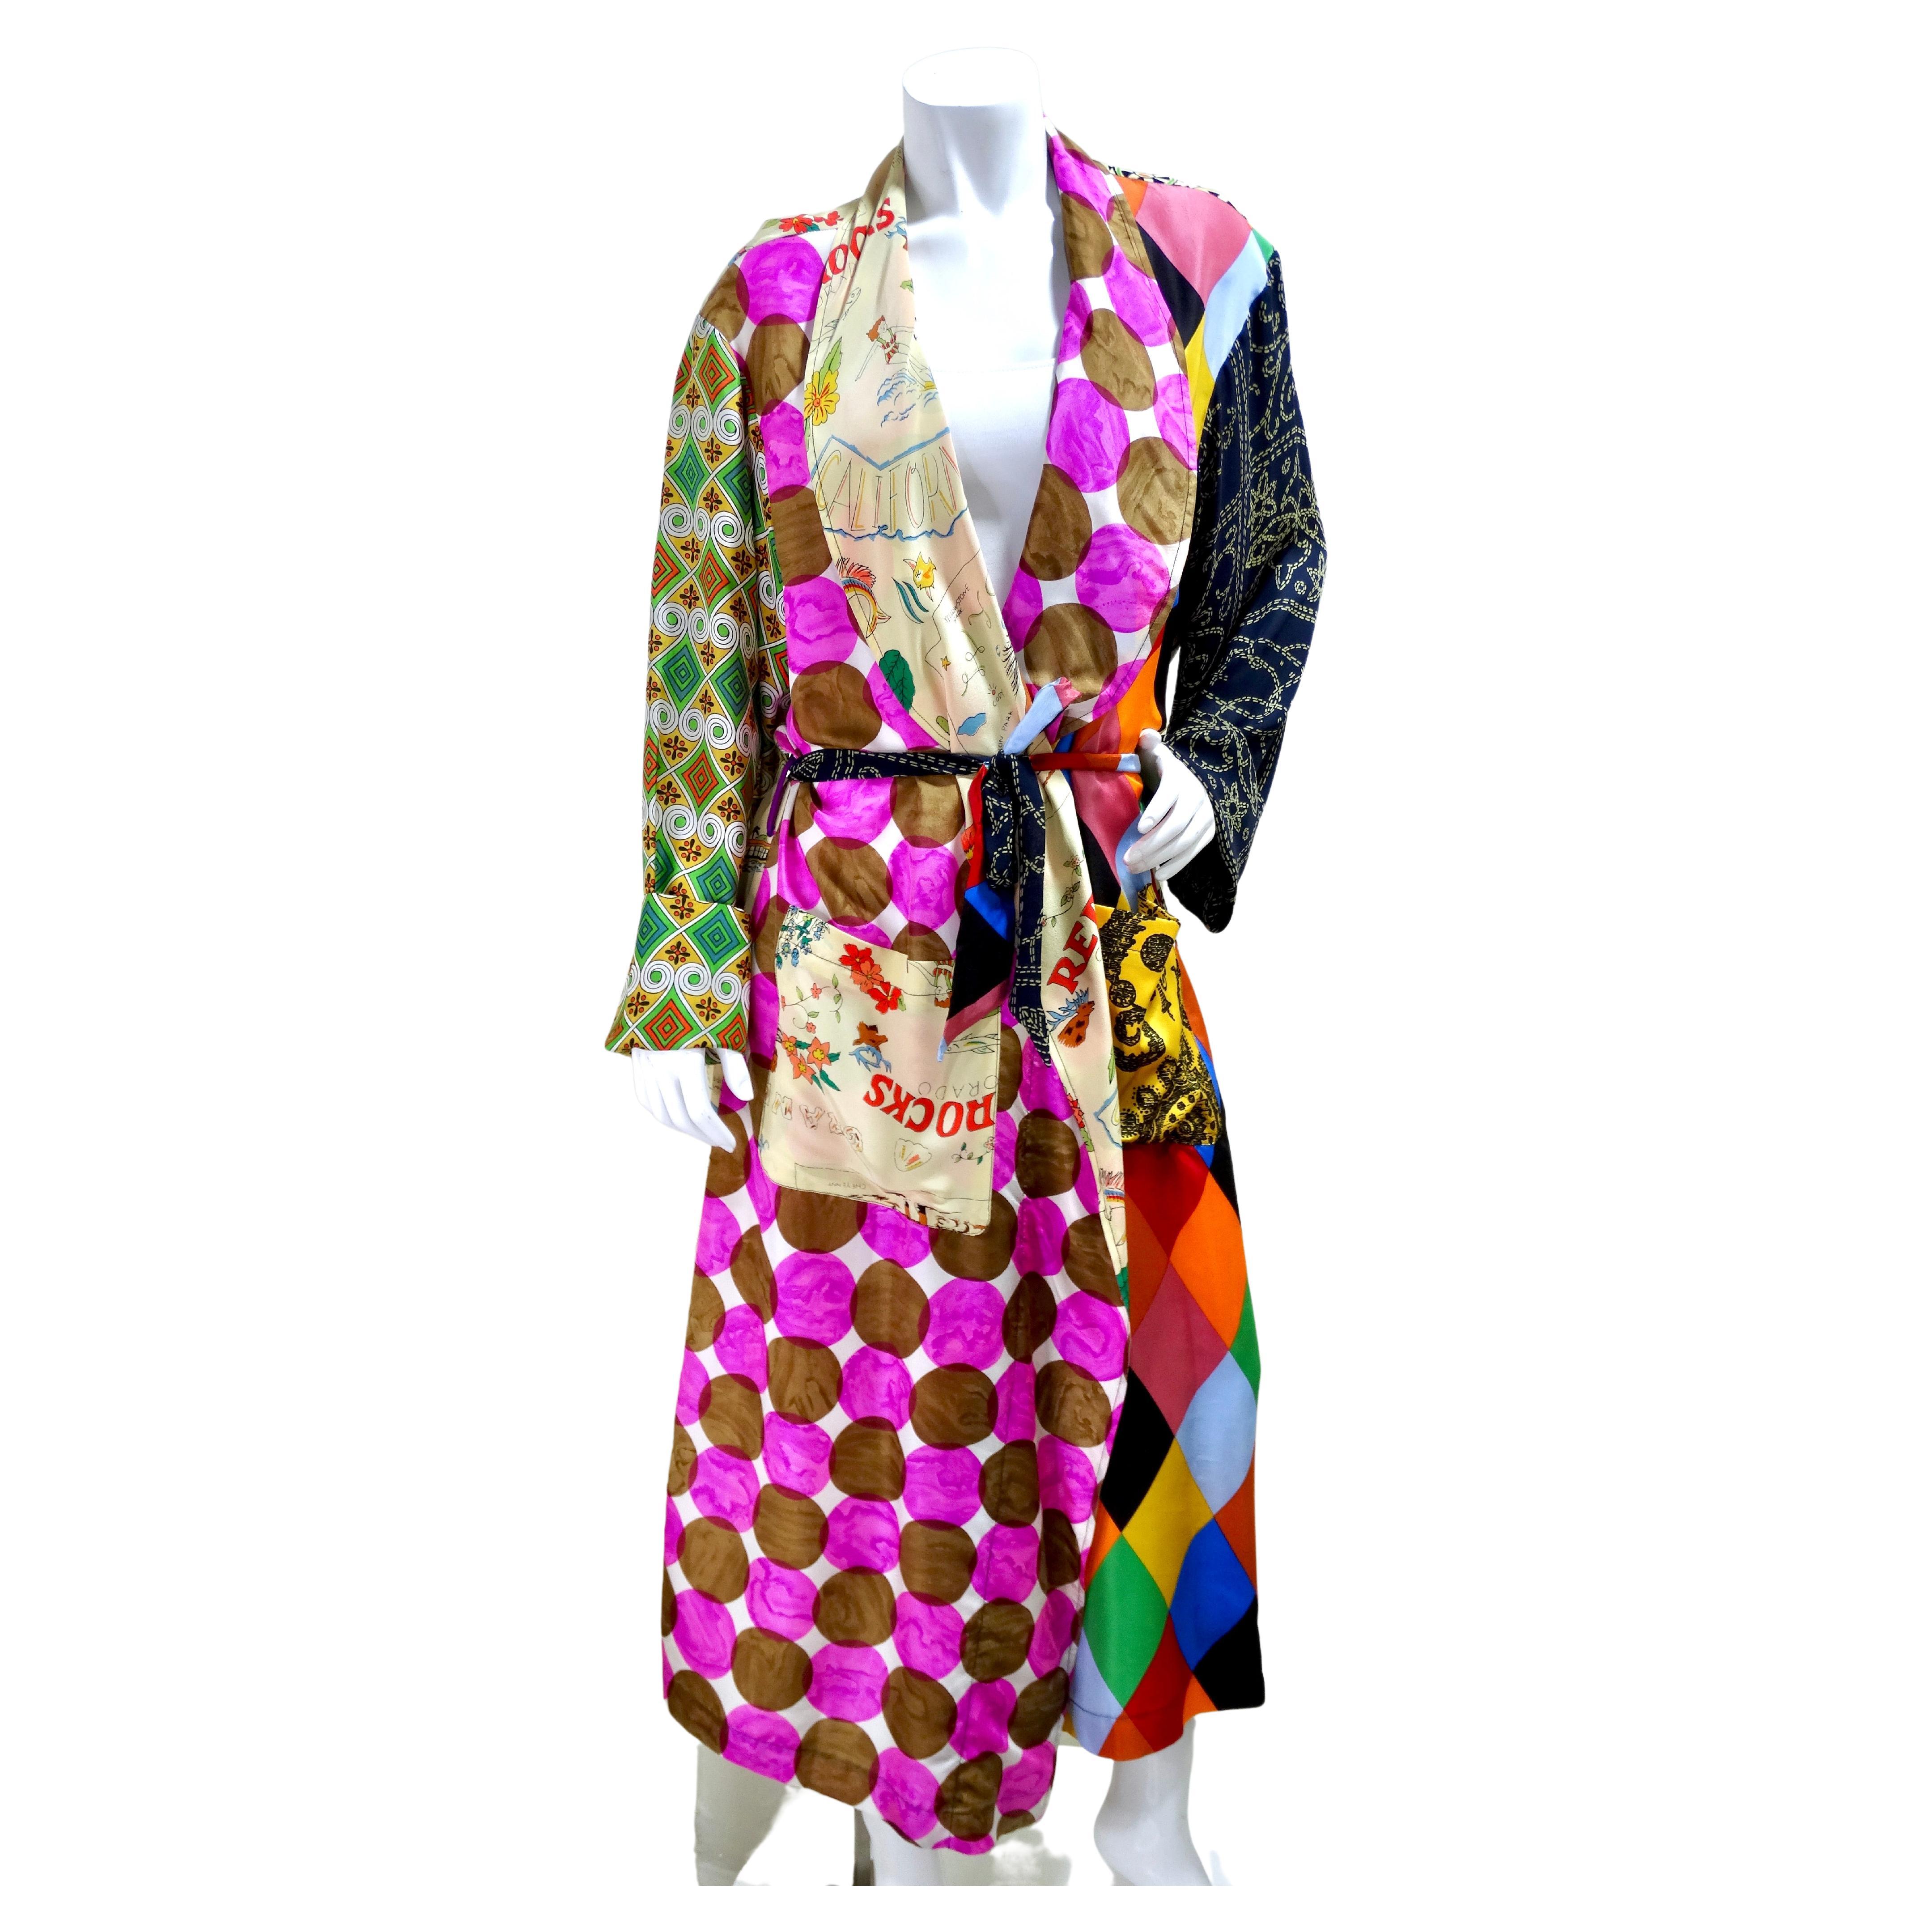 Todd Oldham Wrap-Style Printed Robe/Duster